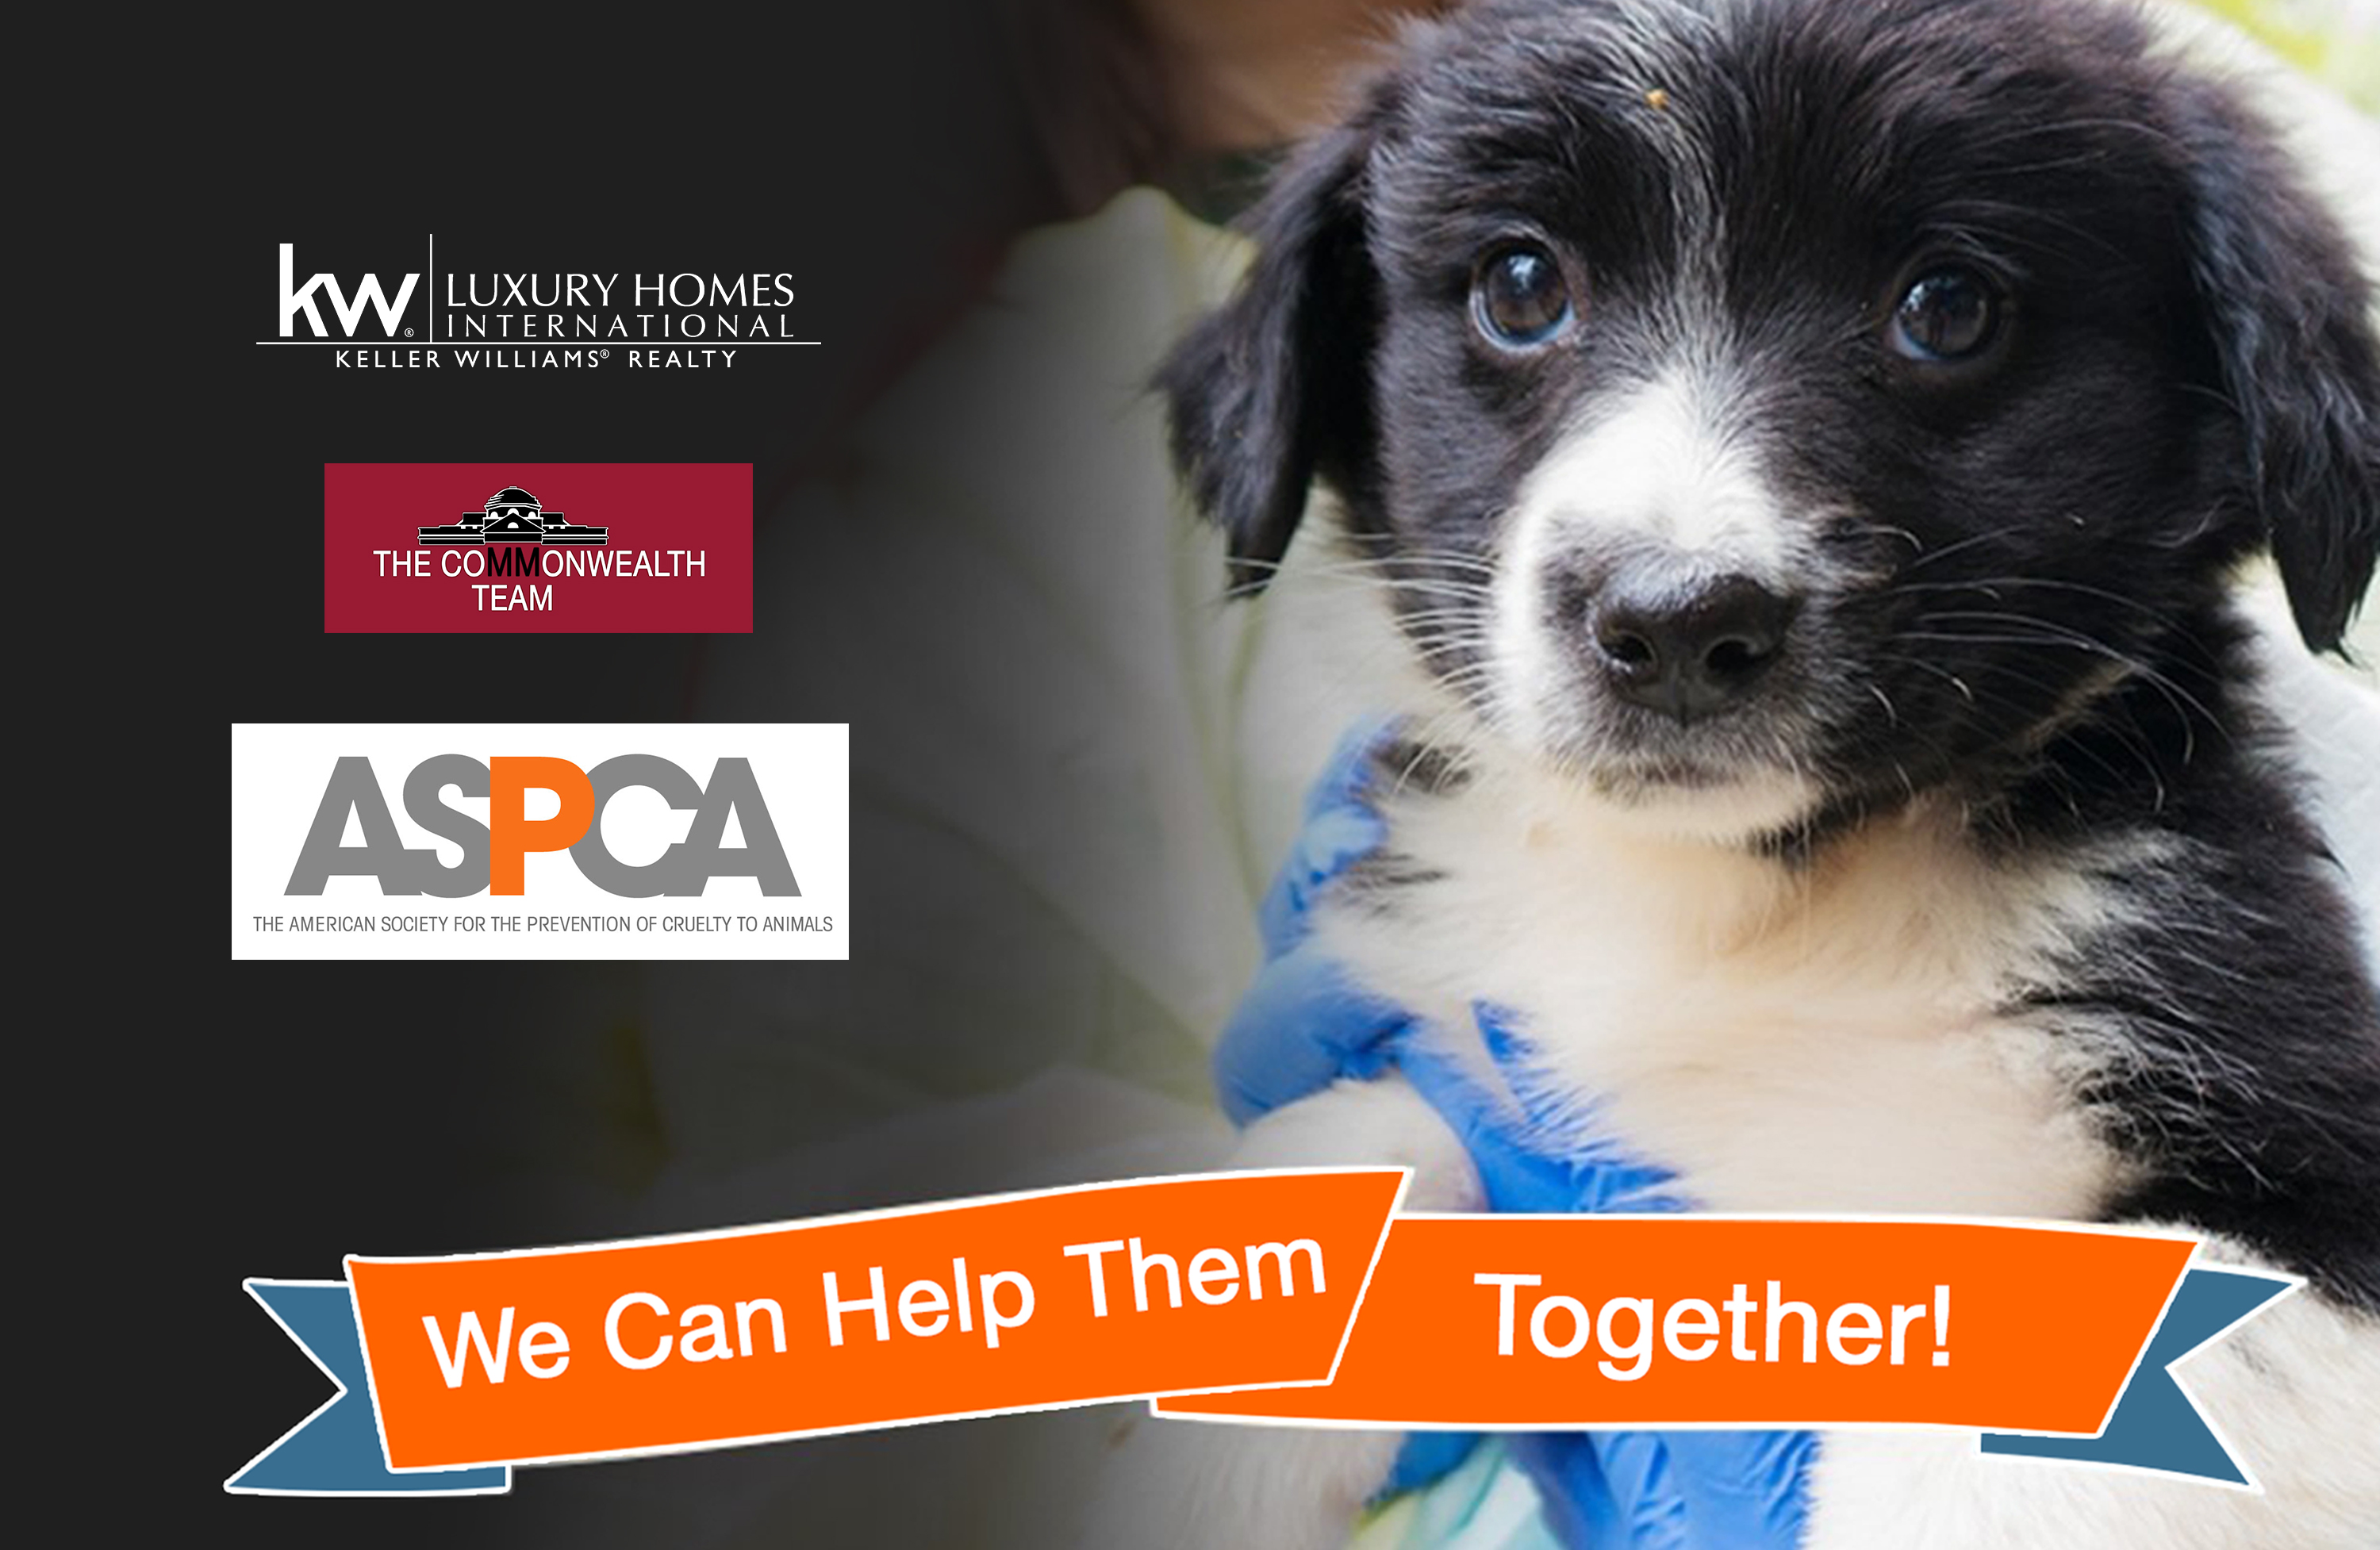 ASPCA Responds to Harvey - We Can Help Them, Together!